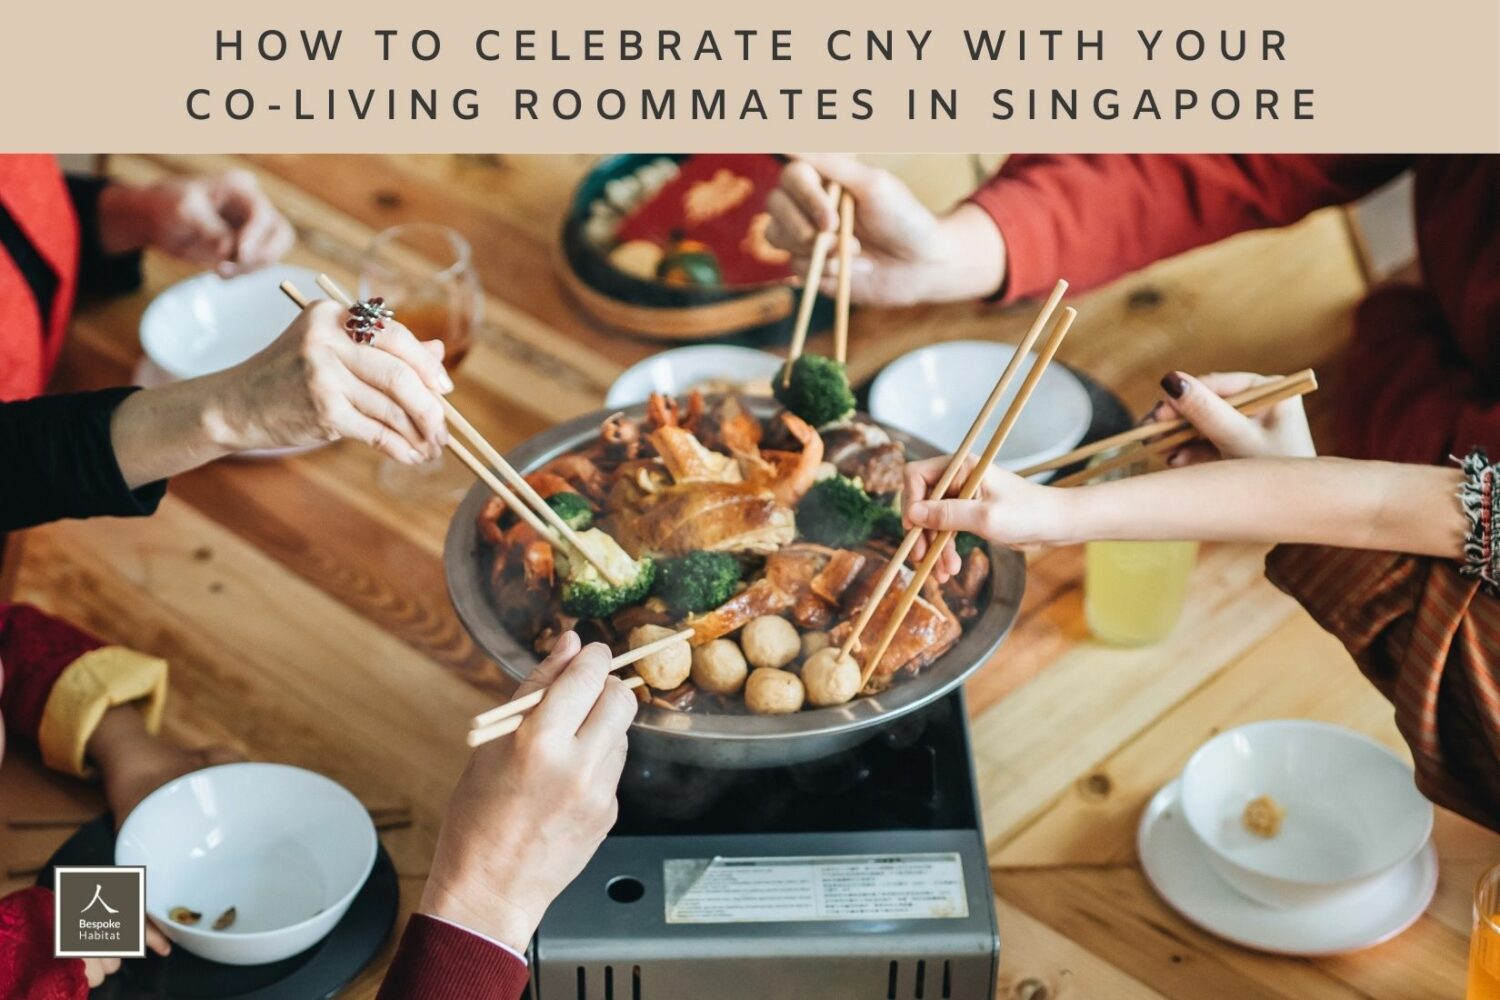 How to Celebrate CNY with Your Co-living Roommates in Singapore